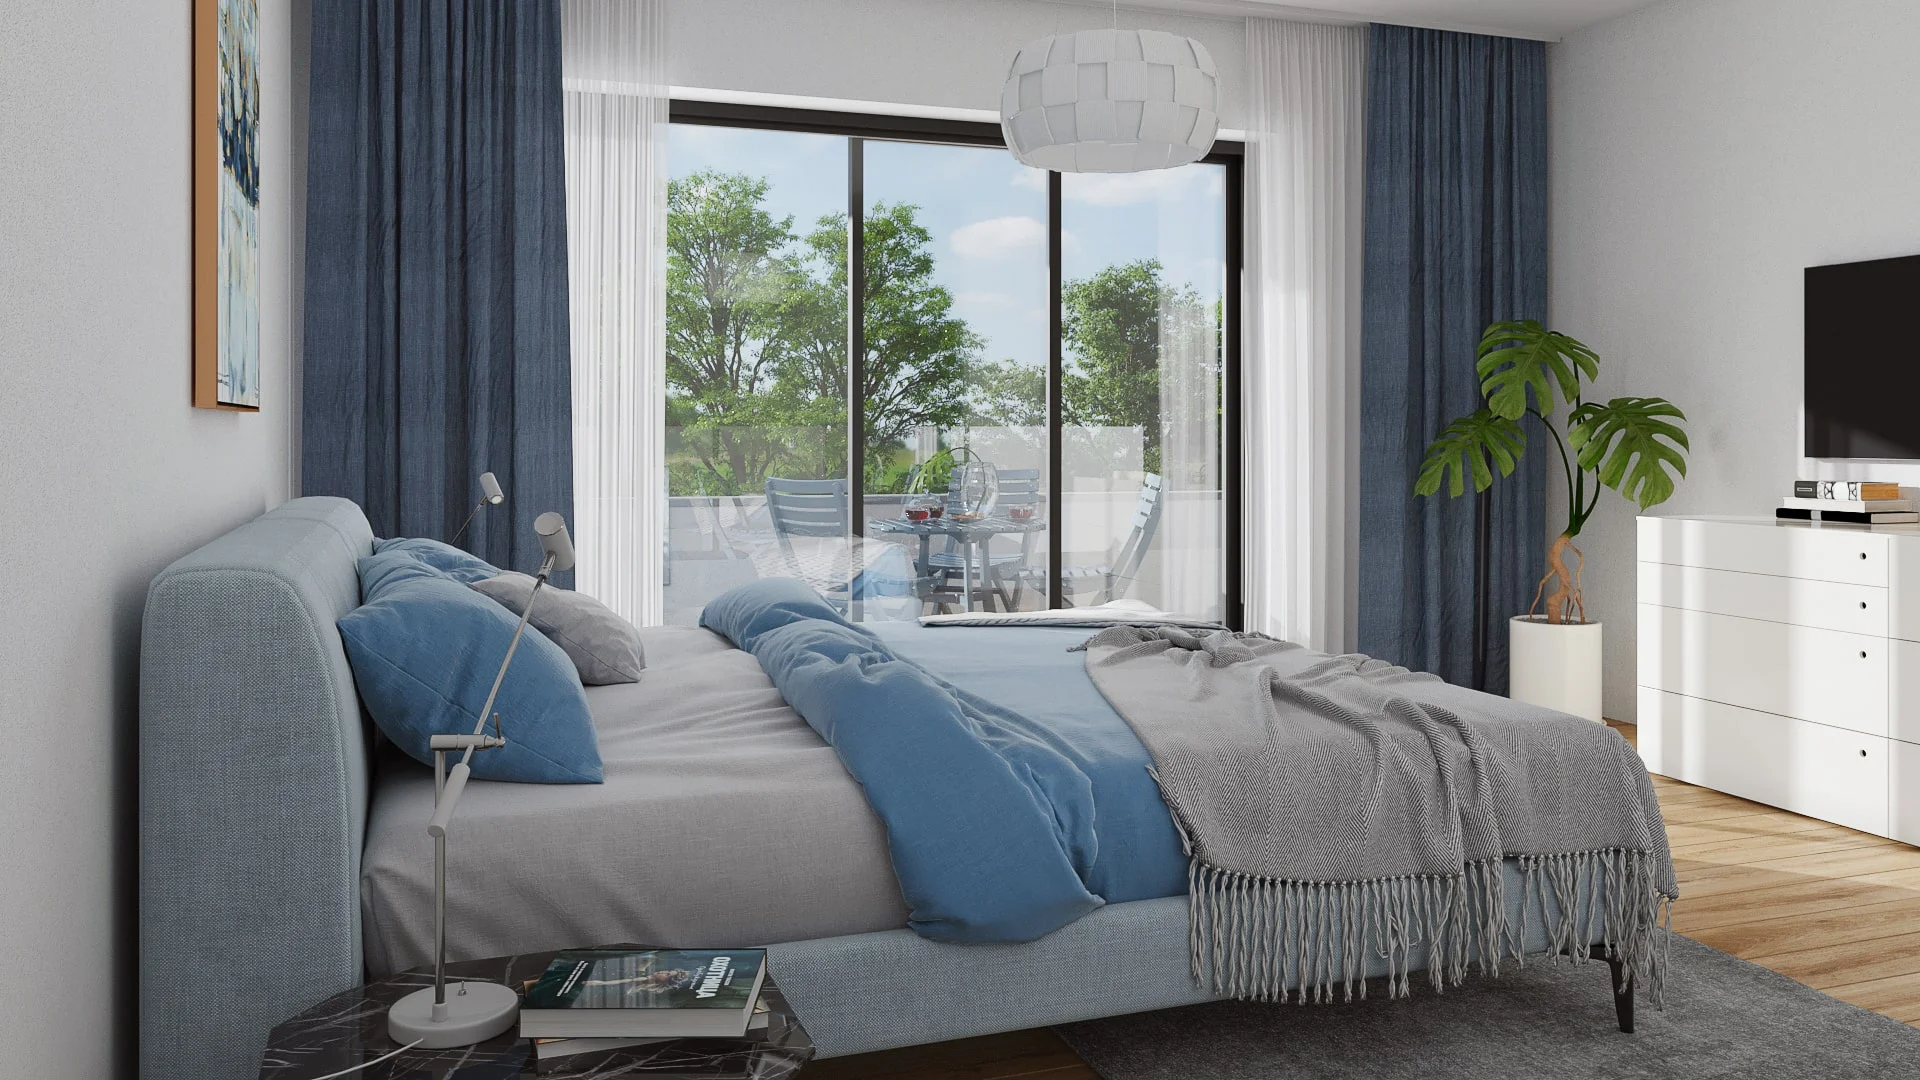 Architectural visualizations. Apartment building. Bedroom